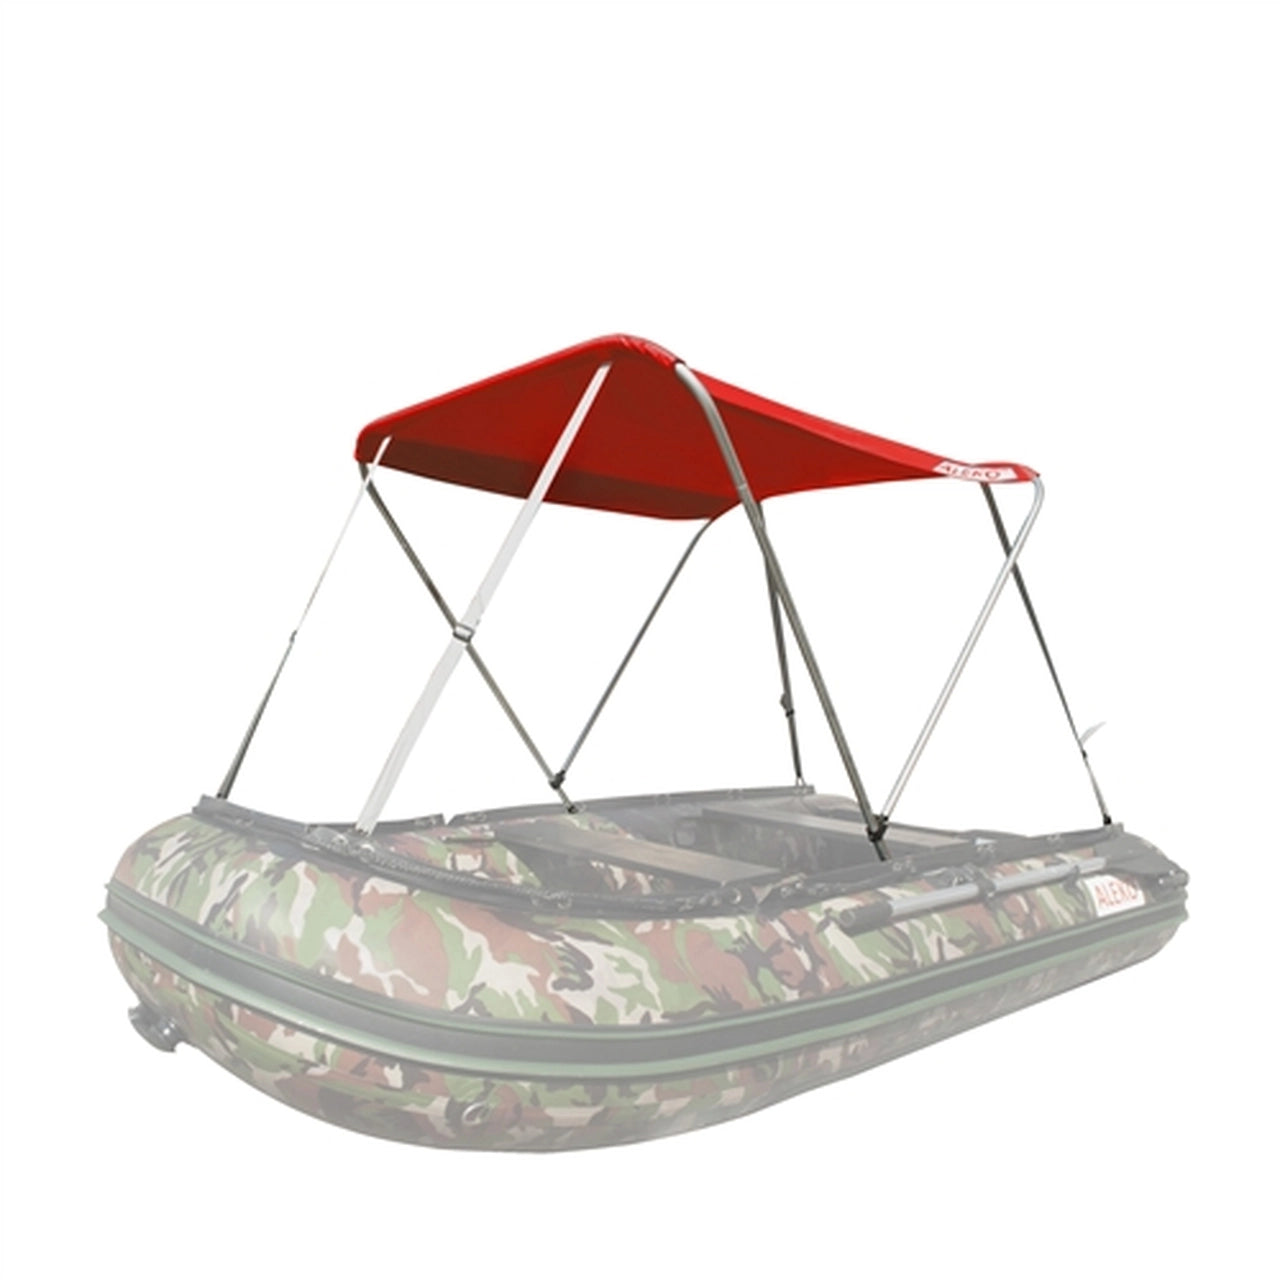 Aleko Boats Summer Canopy Tent for Inflatable Boats 8.5 ft